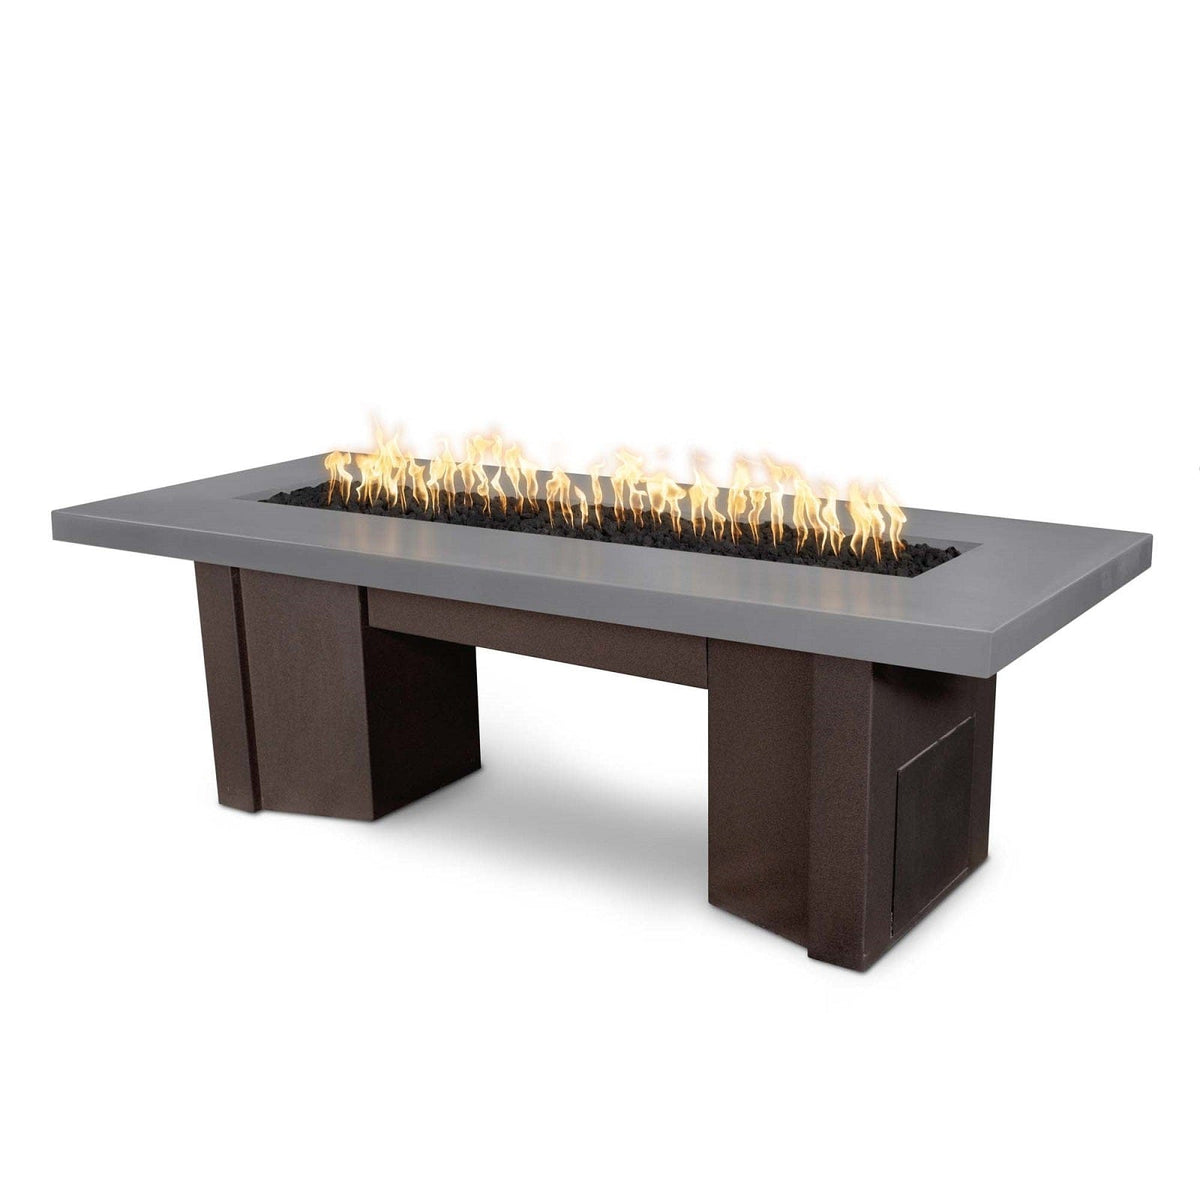 The Outdoor Plus Fire Features Natural Gray (-NGY) / Java Powder Coated Steel (-JAV) The Outdoor Plus 60&quot; Alameda Fire Table Smooth Concrete in Liquid Propane - 110V Plug &amp; Play Electronic Ignition / OPT-ALMGFRC60EKIT-LP